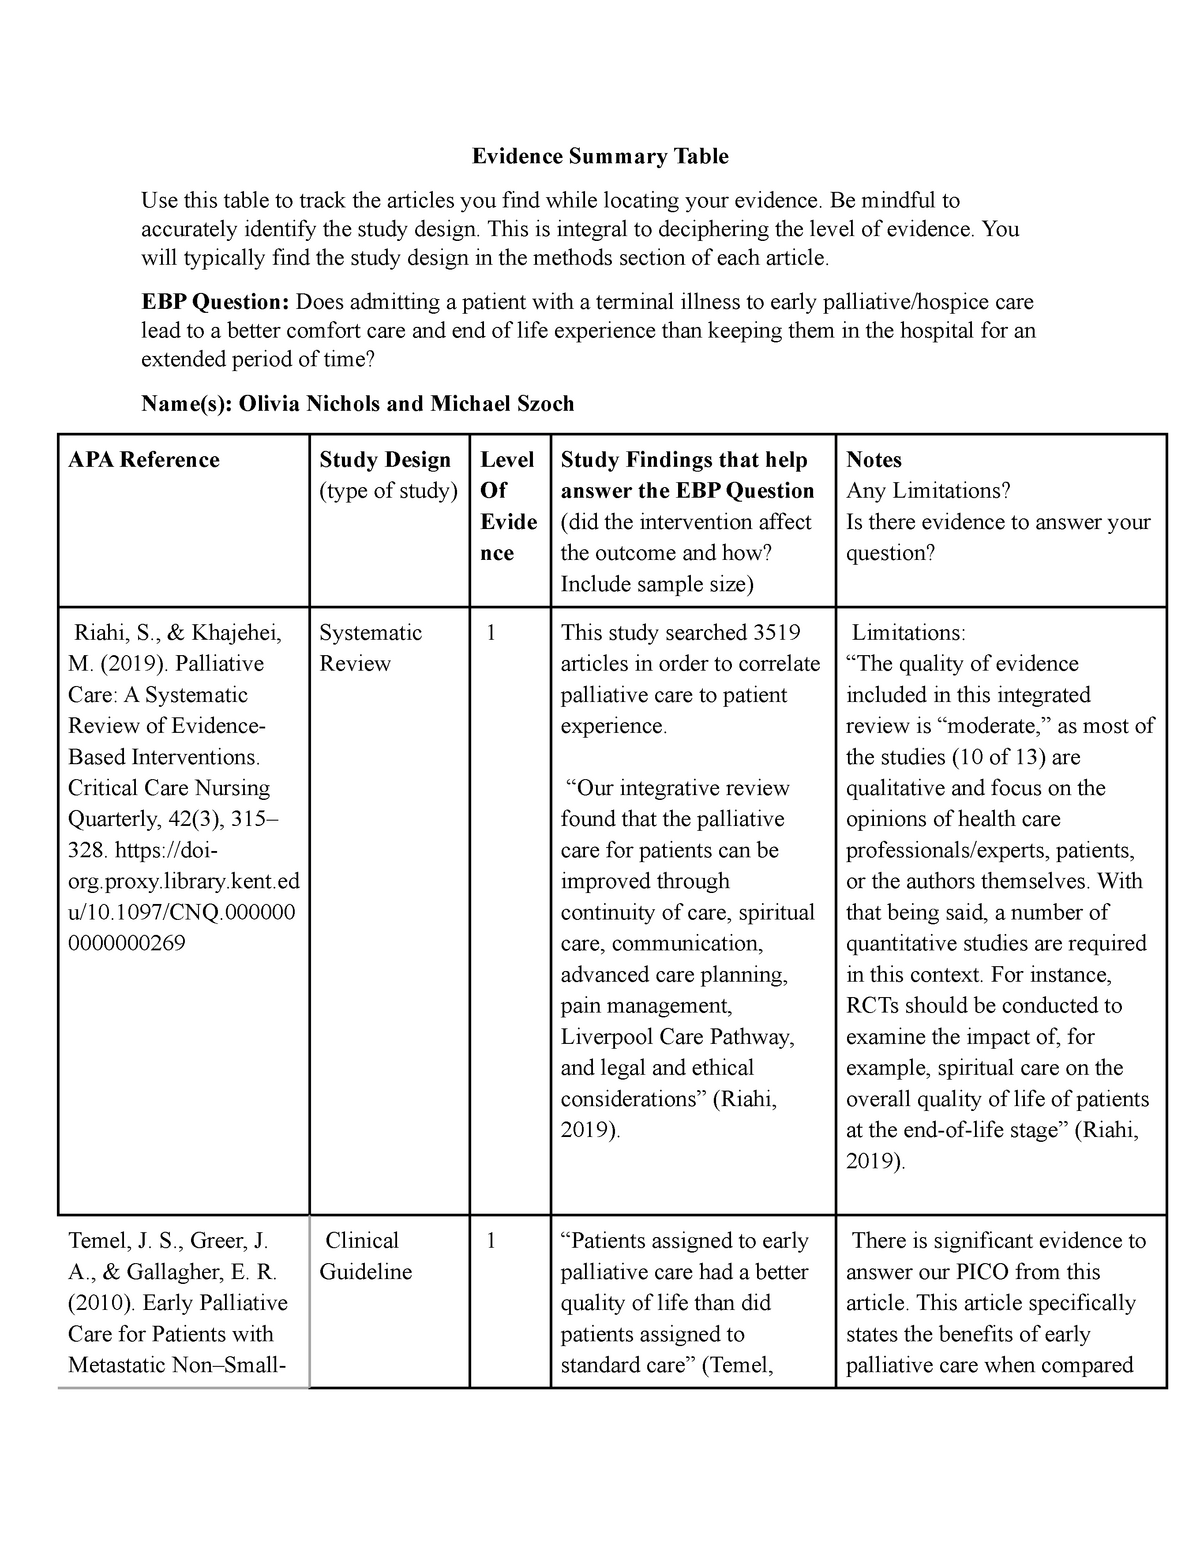 Evidence Summary Table for Introduction To Nursing Research